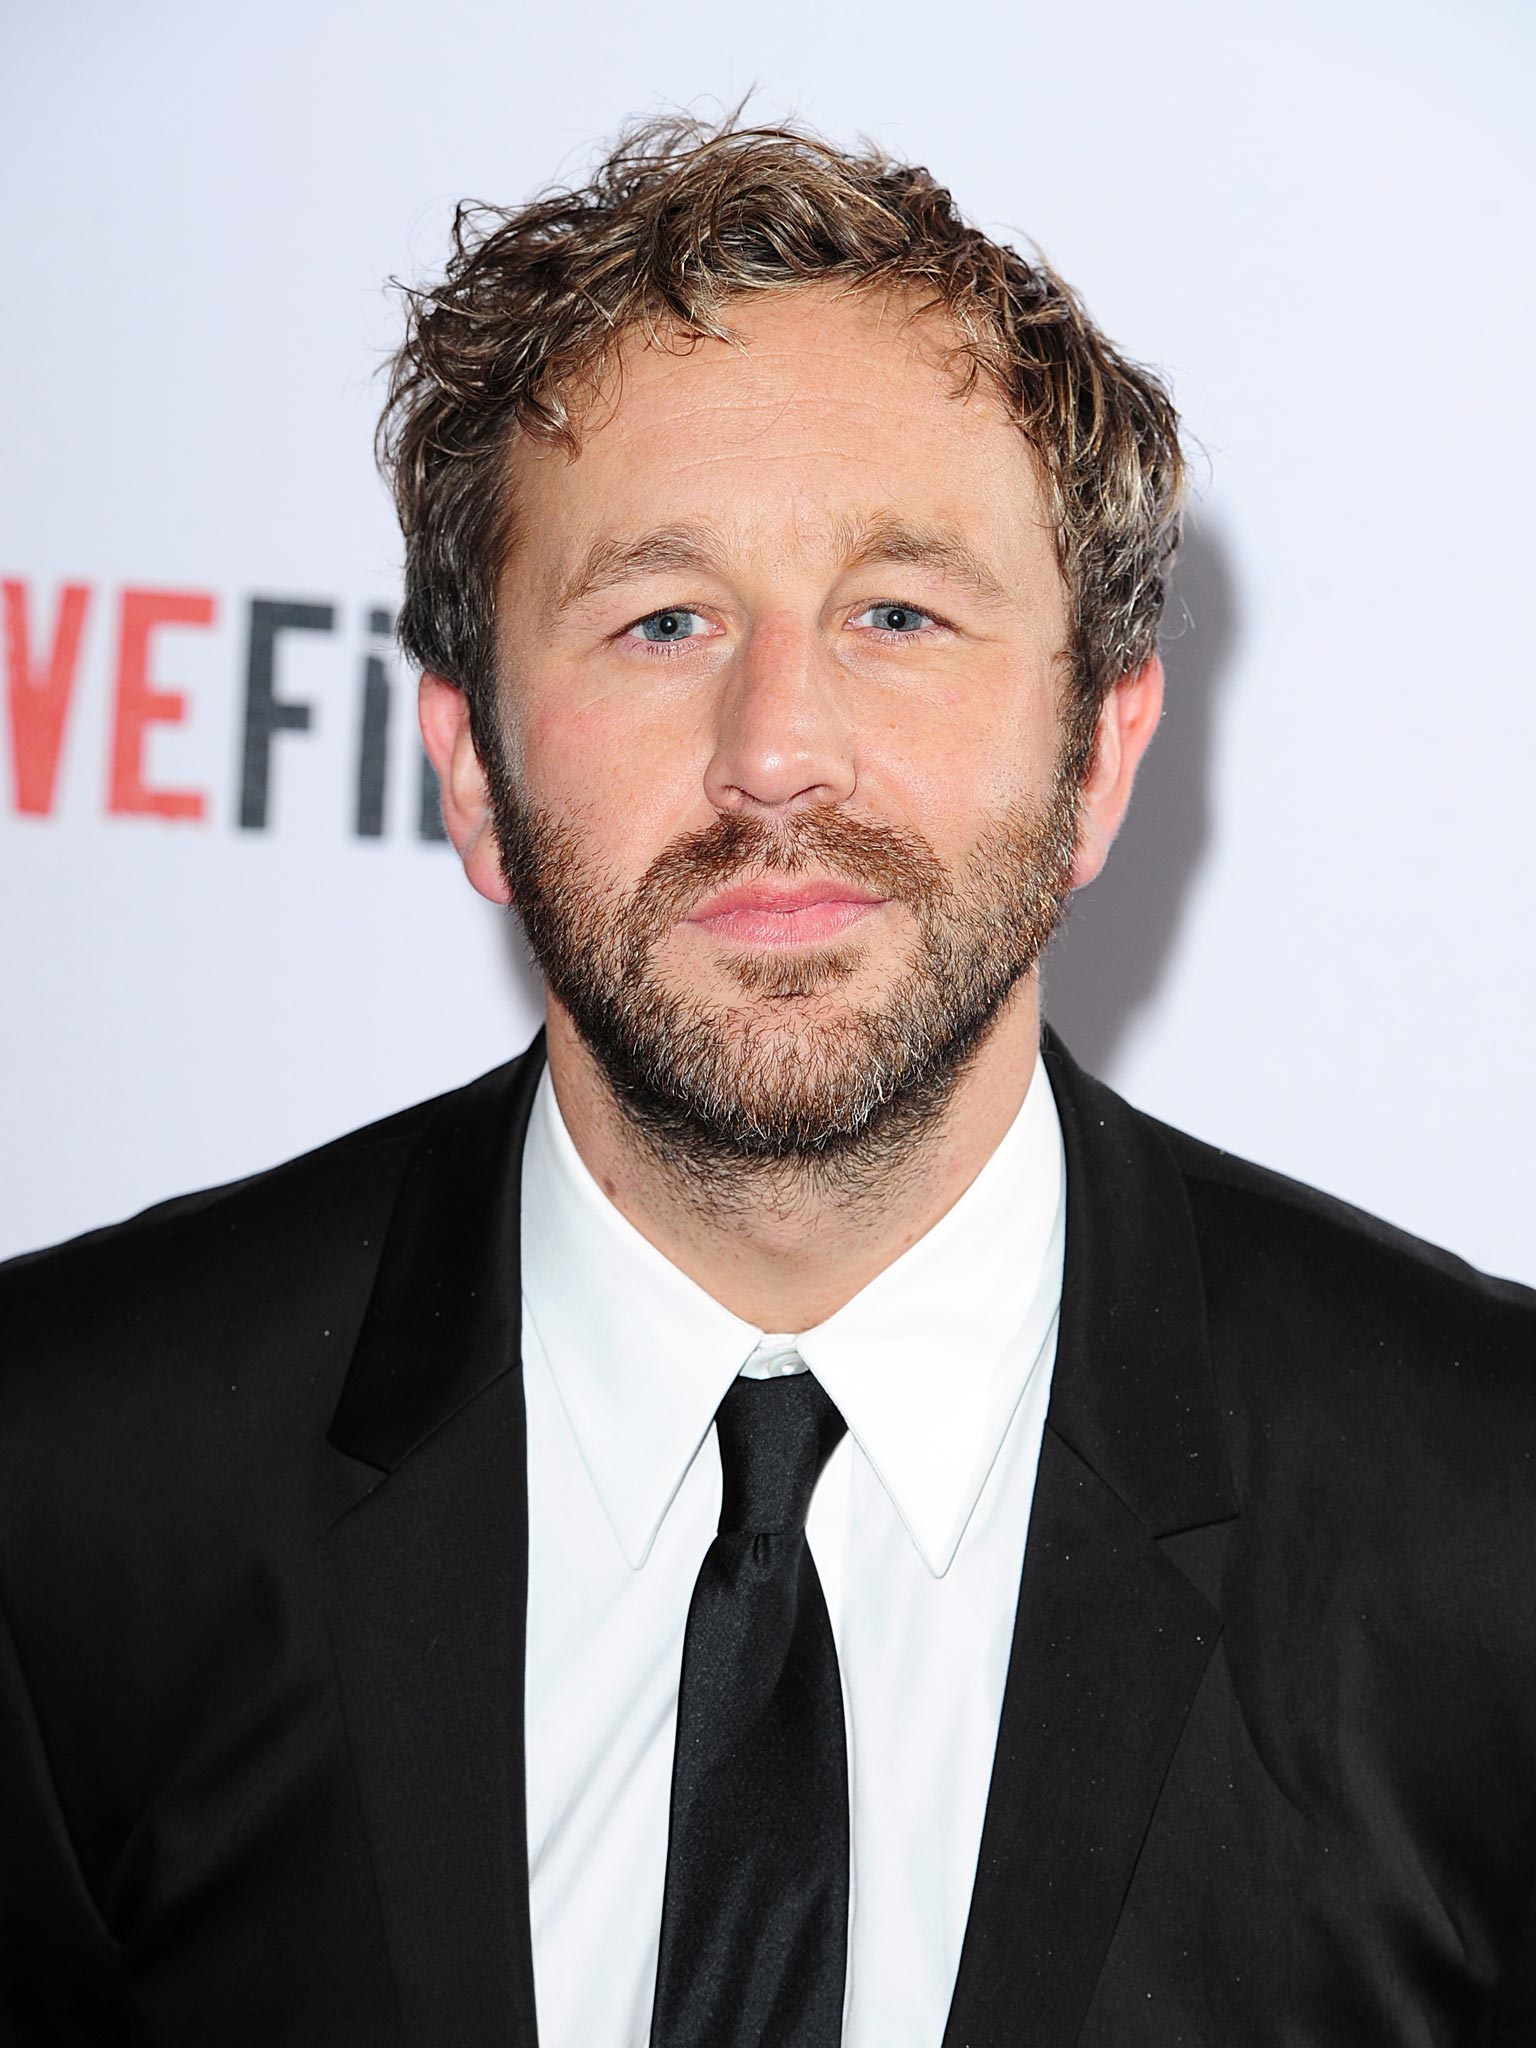 Operation Black Vote, a group set up to promote racial justice, said the Irish actor Chris O’Dowd had raised a valid issue